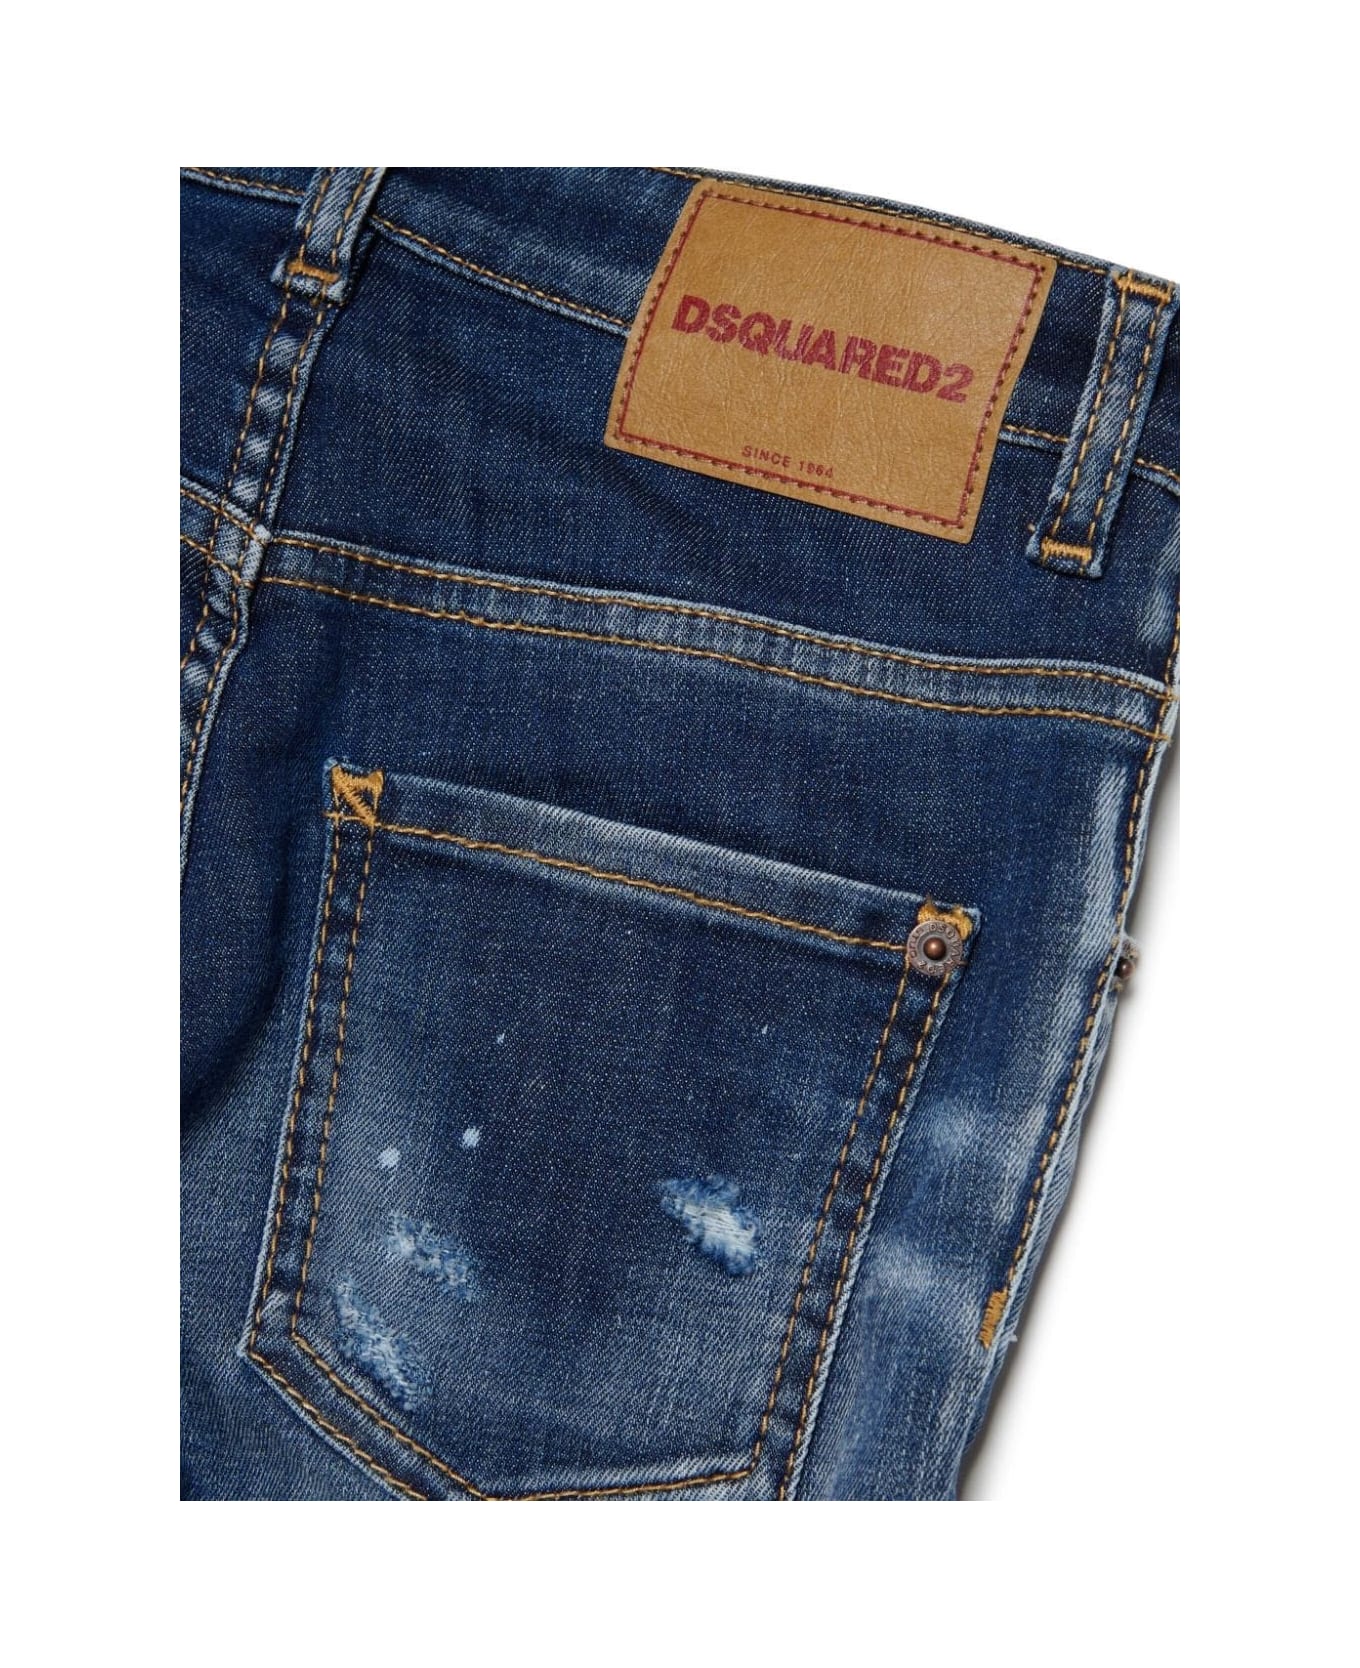 Dsquared2 Skater Skinny Jeans In Dark Blue Washed With Rips - Blue